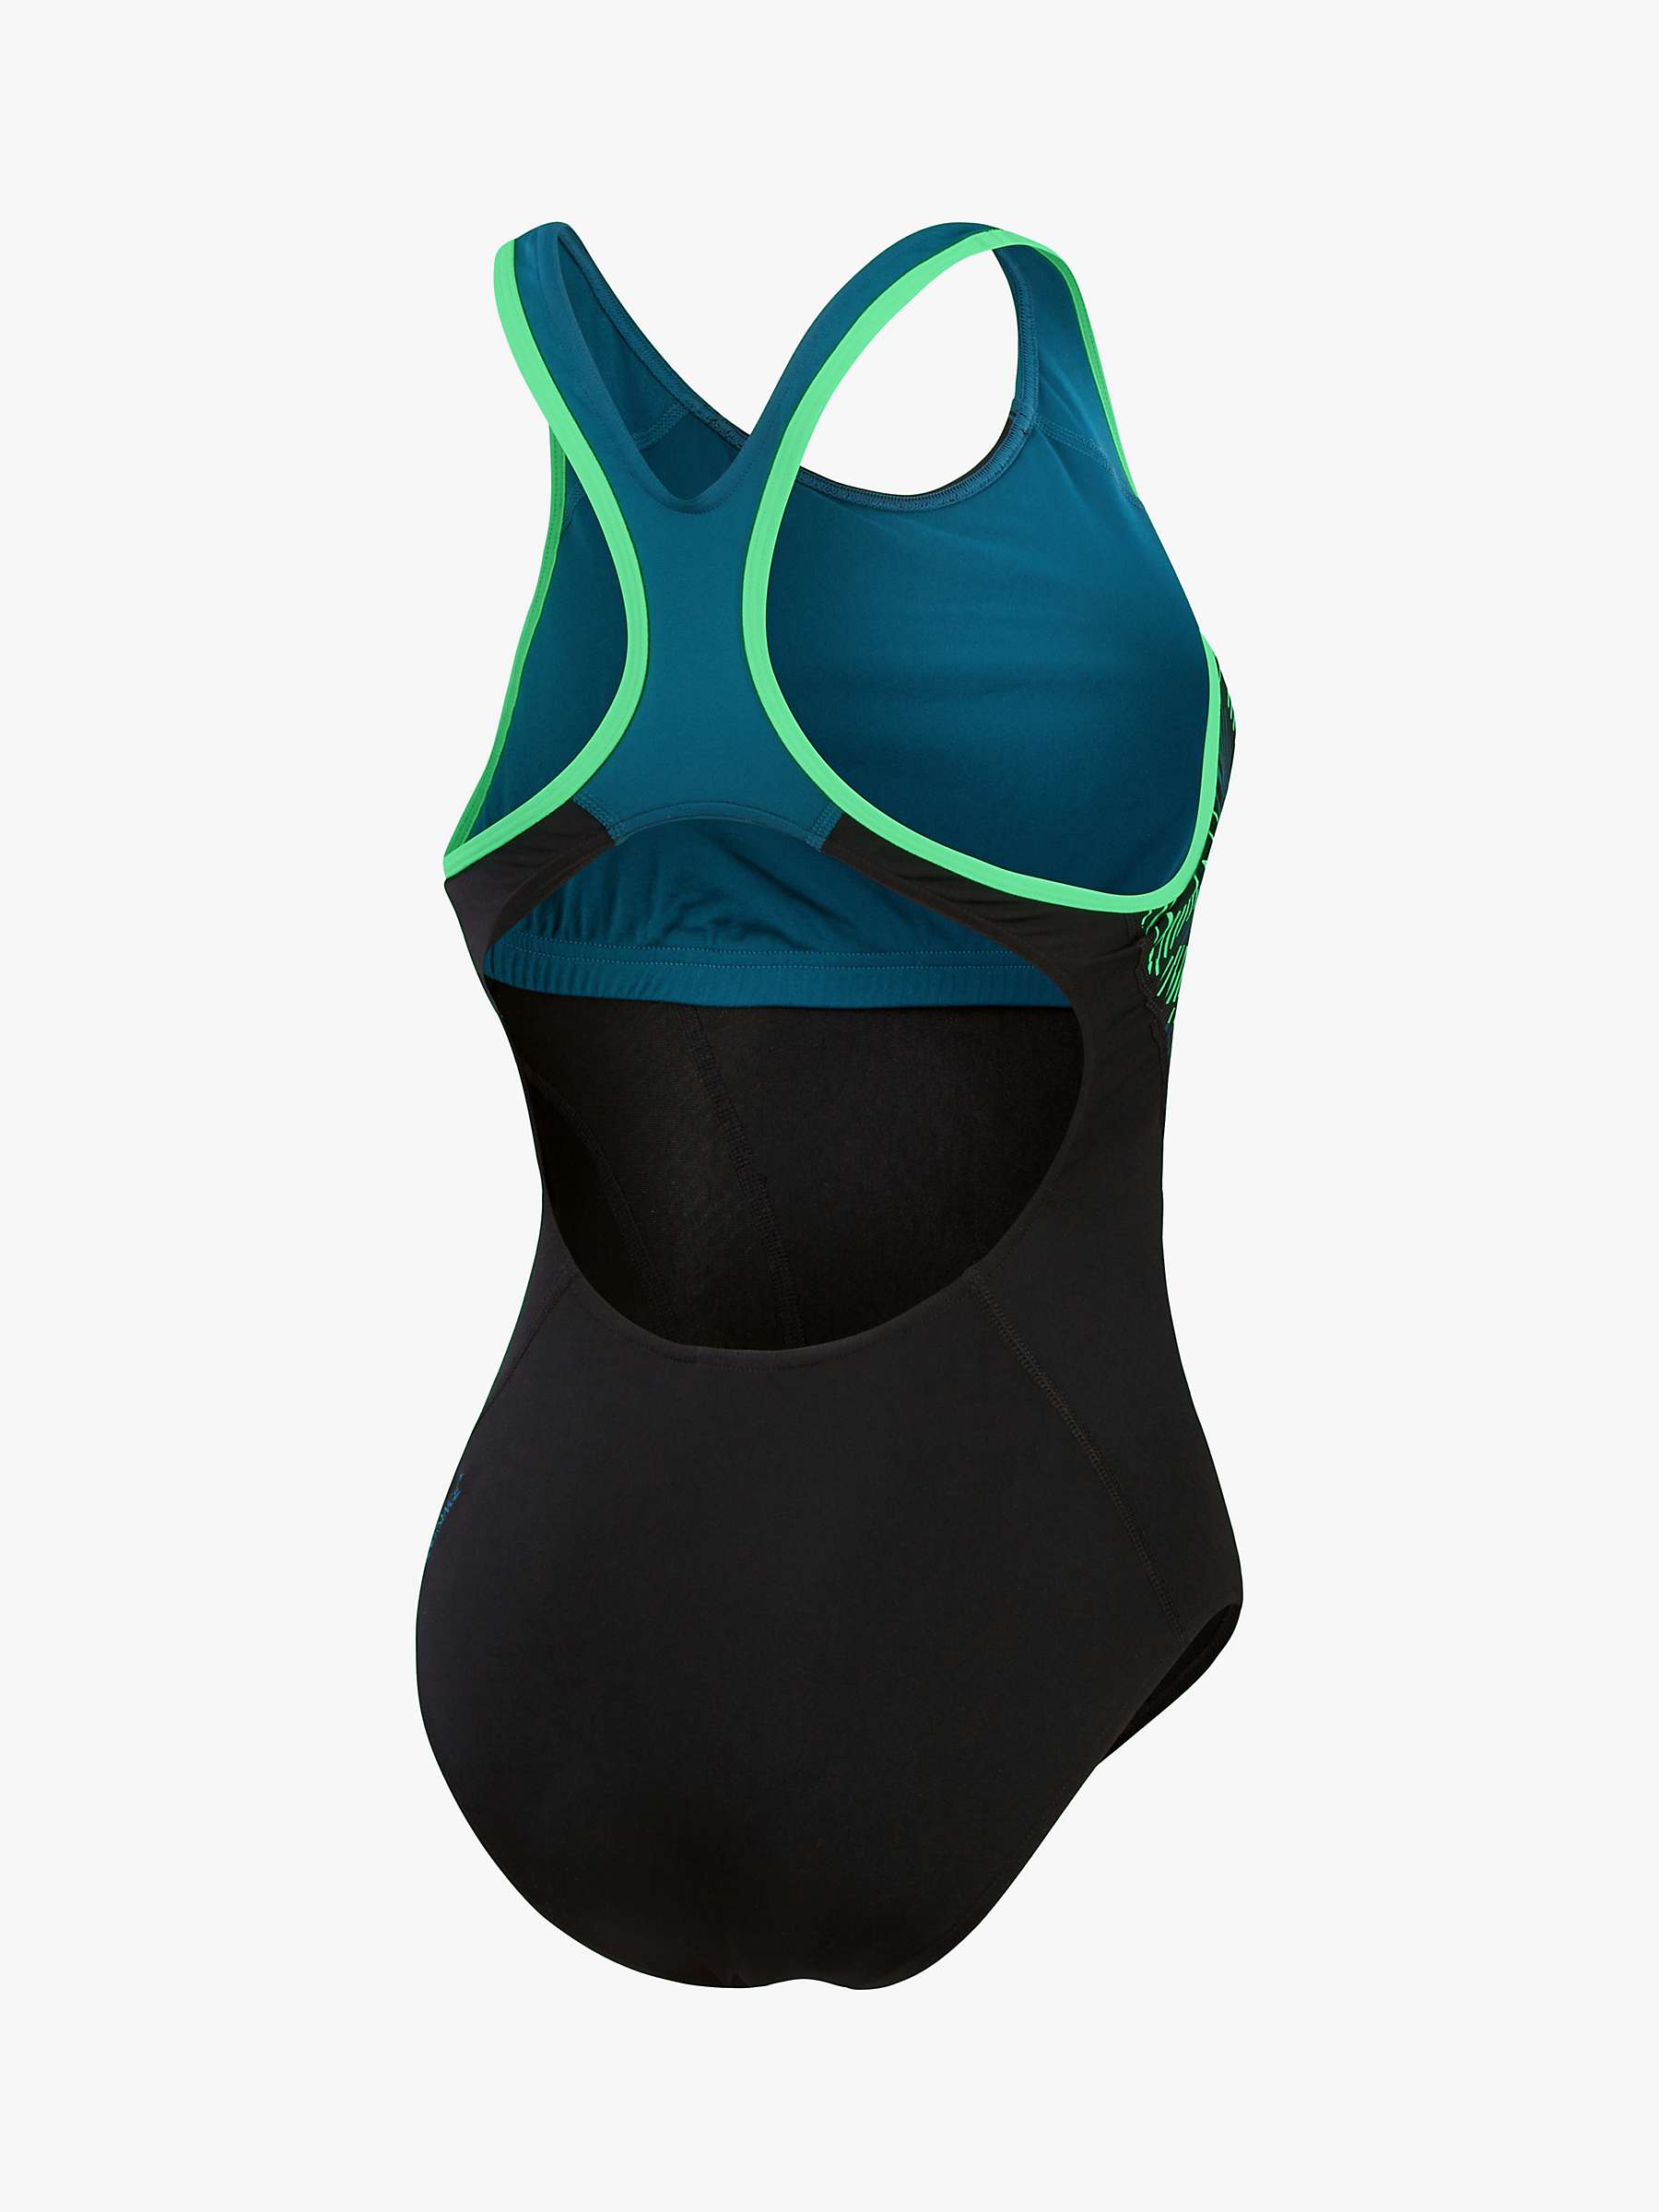 Buy Speedo Placement Muscleback Swimsuit Online at johnlewis.com